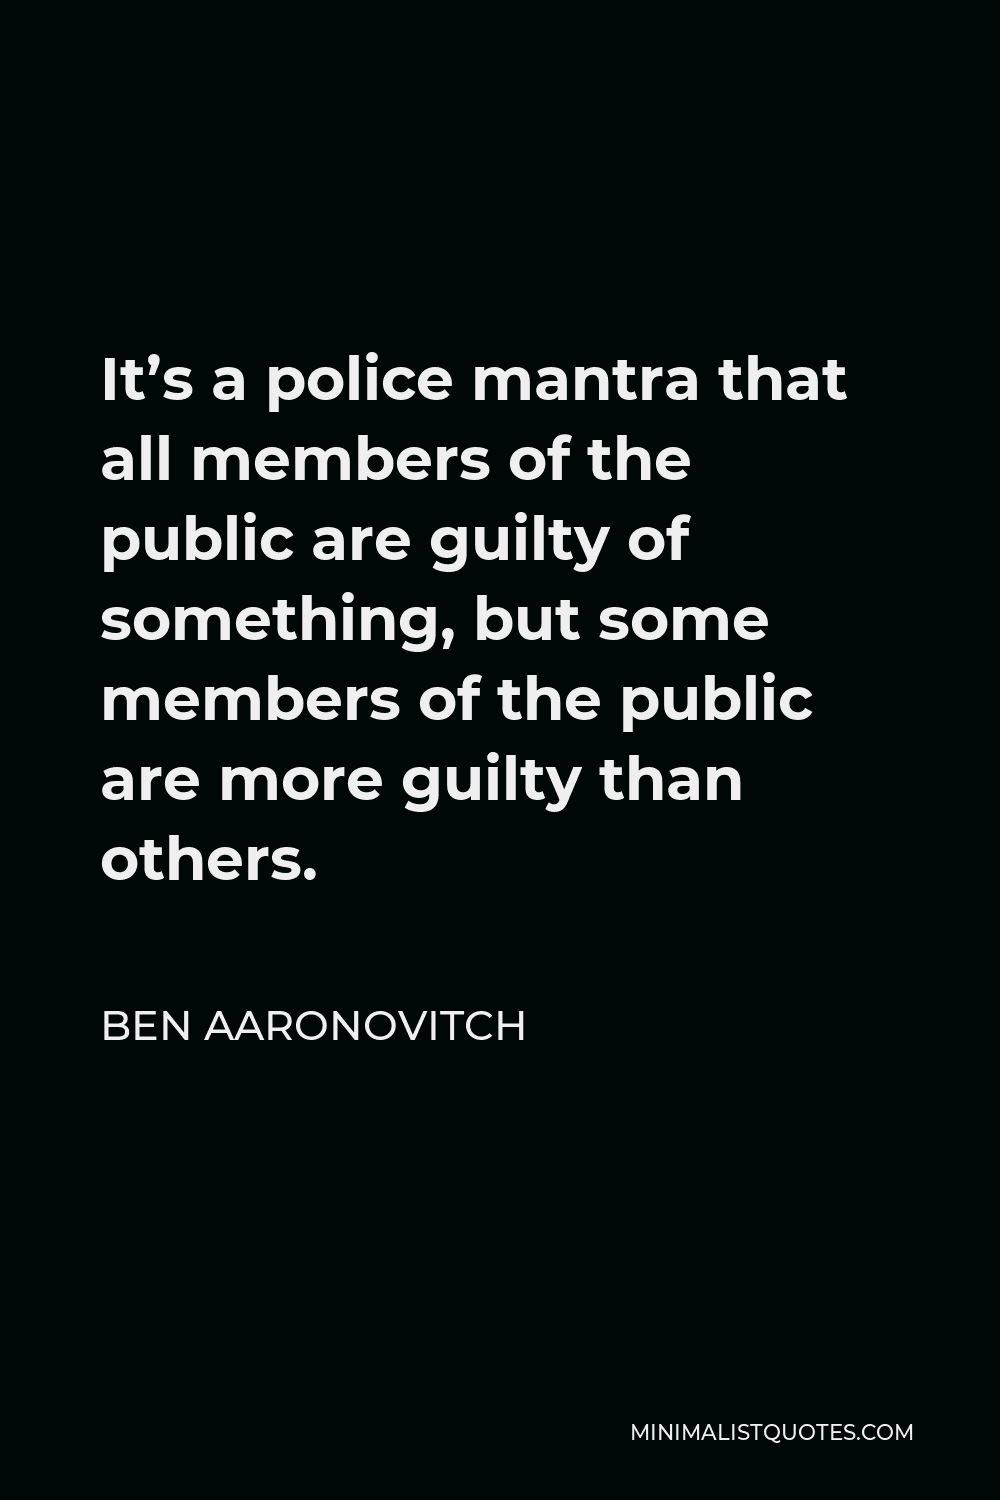 Ben Aaronovitch Quote - It’s a police mantra that all members of the public are guilty of something, but some members of the public are more guilty than others.